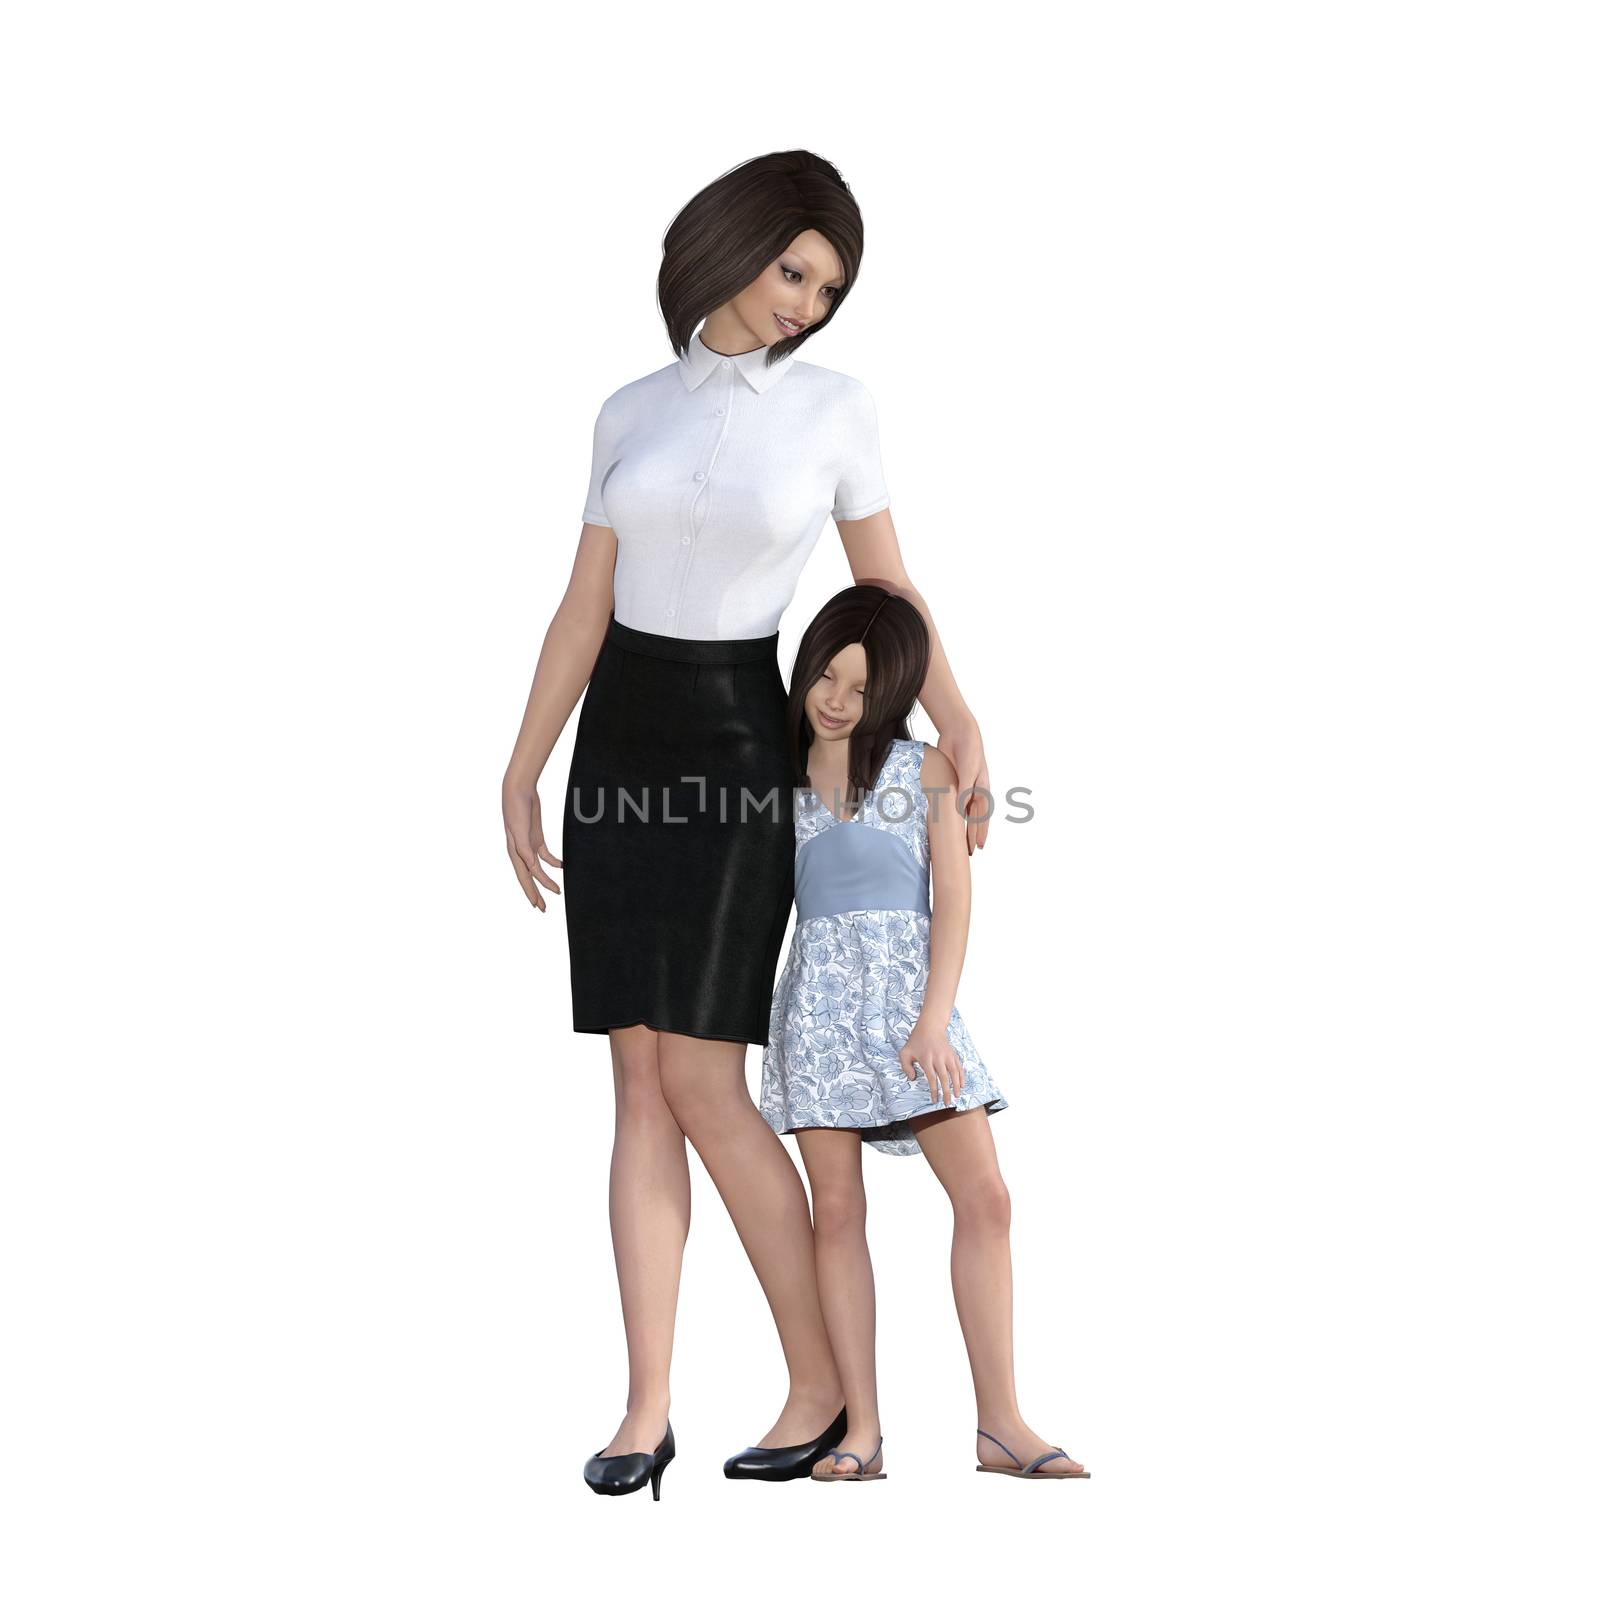 Mother Daughter Interaction of Mom Comforting Girl as an Illustration Concept